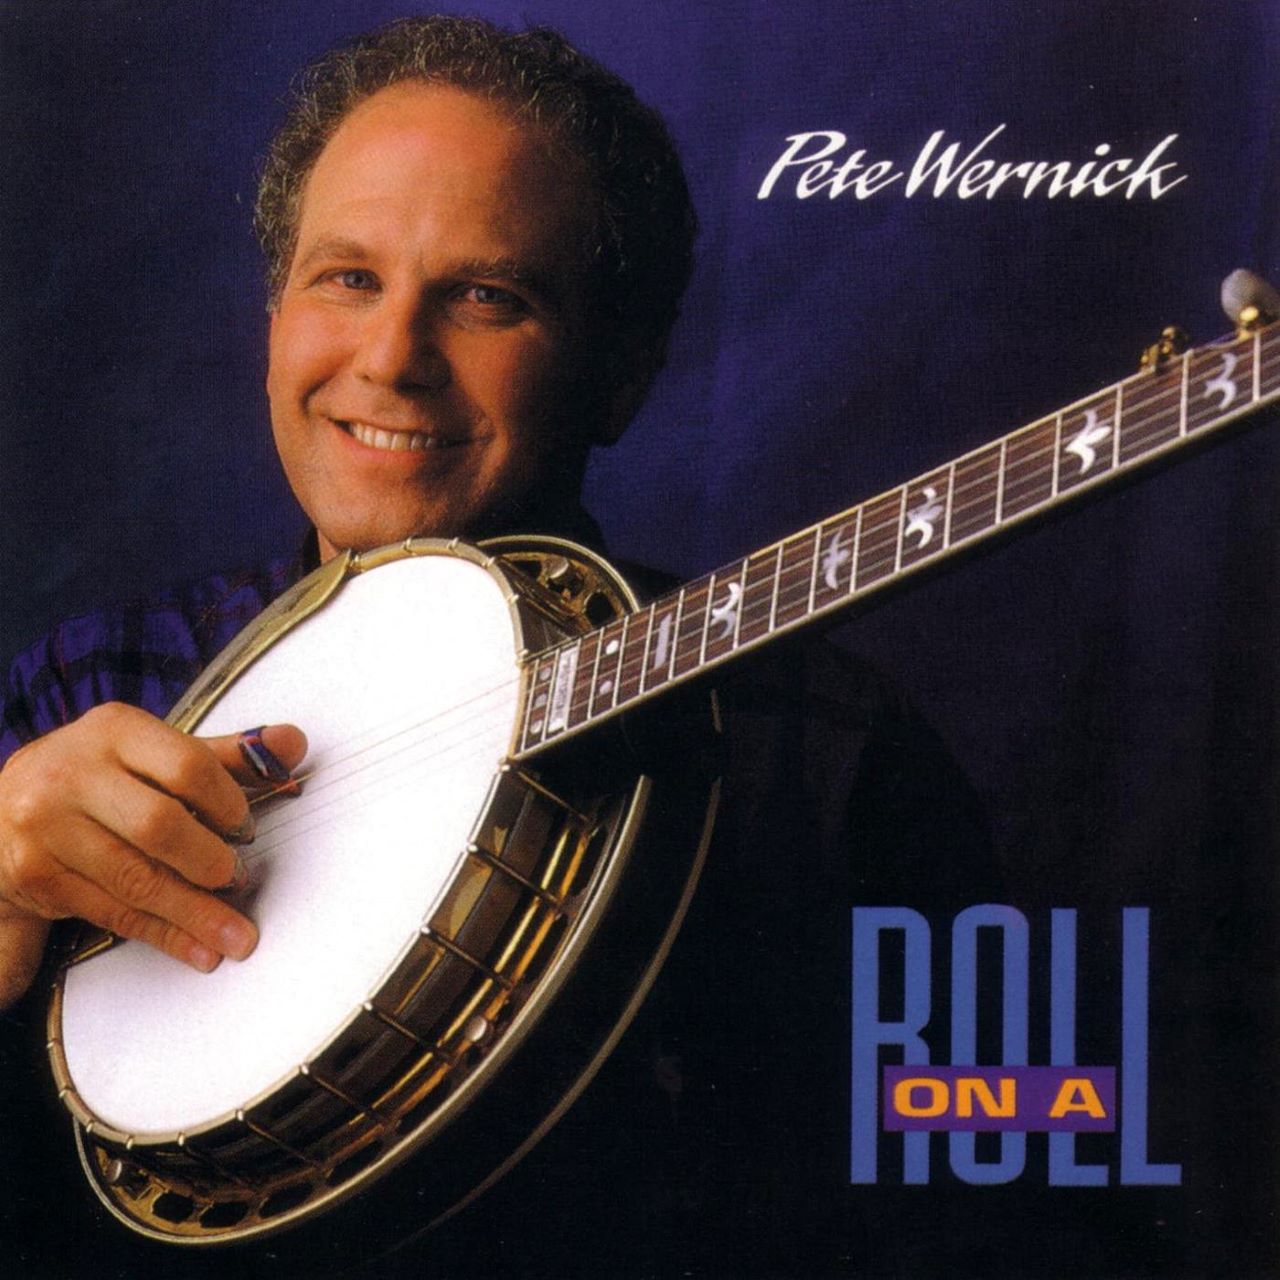 Pete Wernick - On A Roll cover album